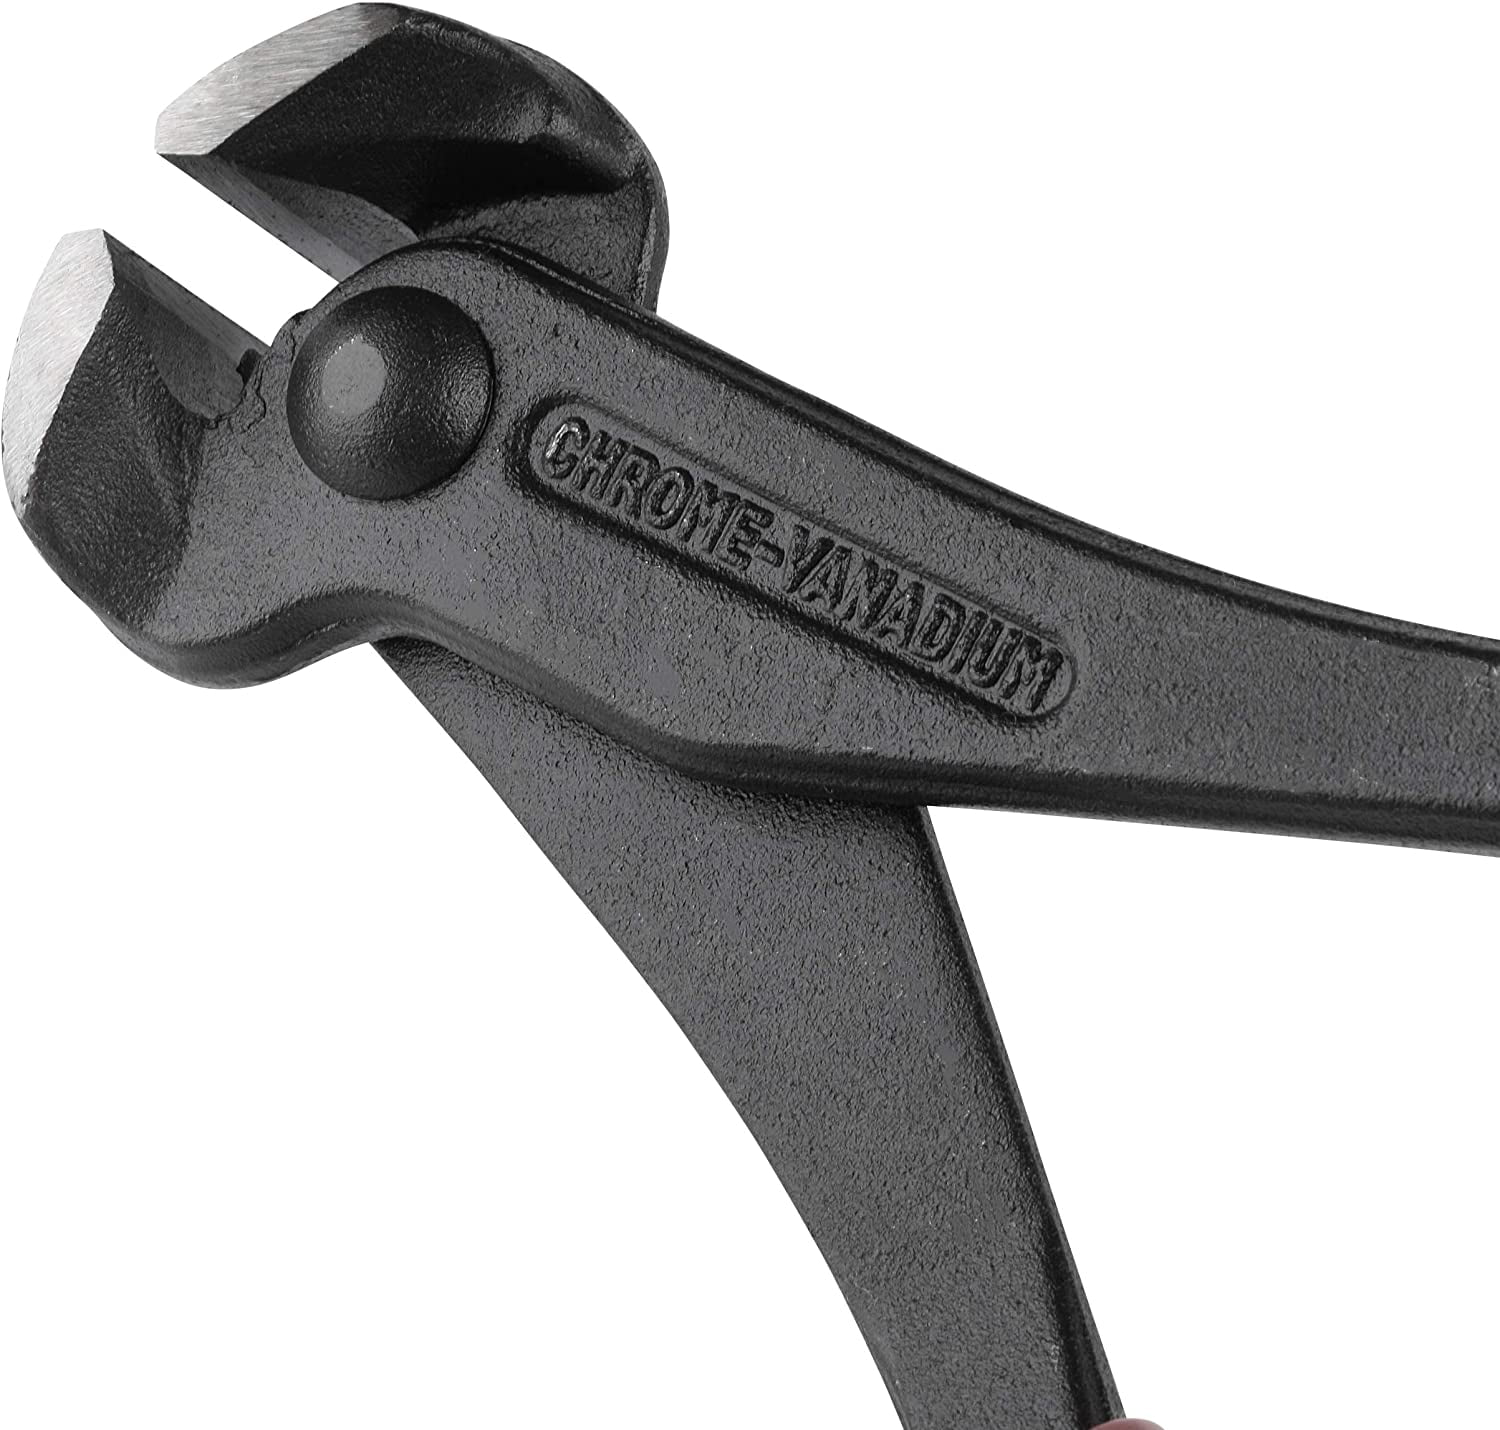 TICLW12 Clawbar with Dimple Nail Puller Review - Fine Homebuilding